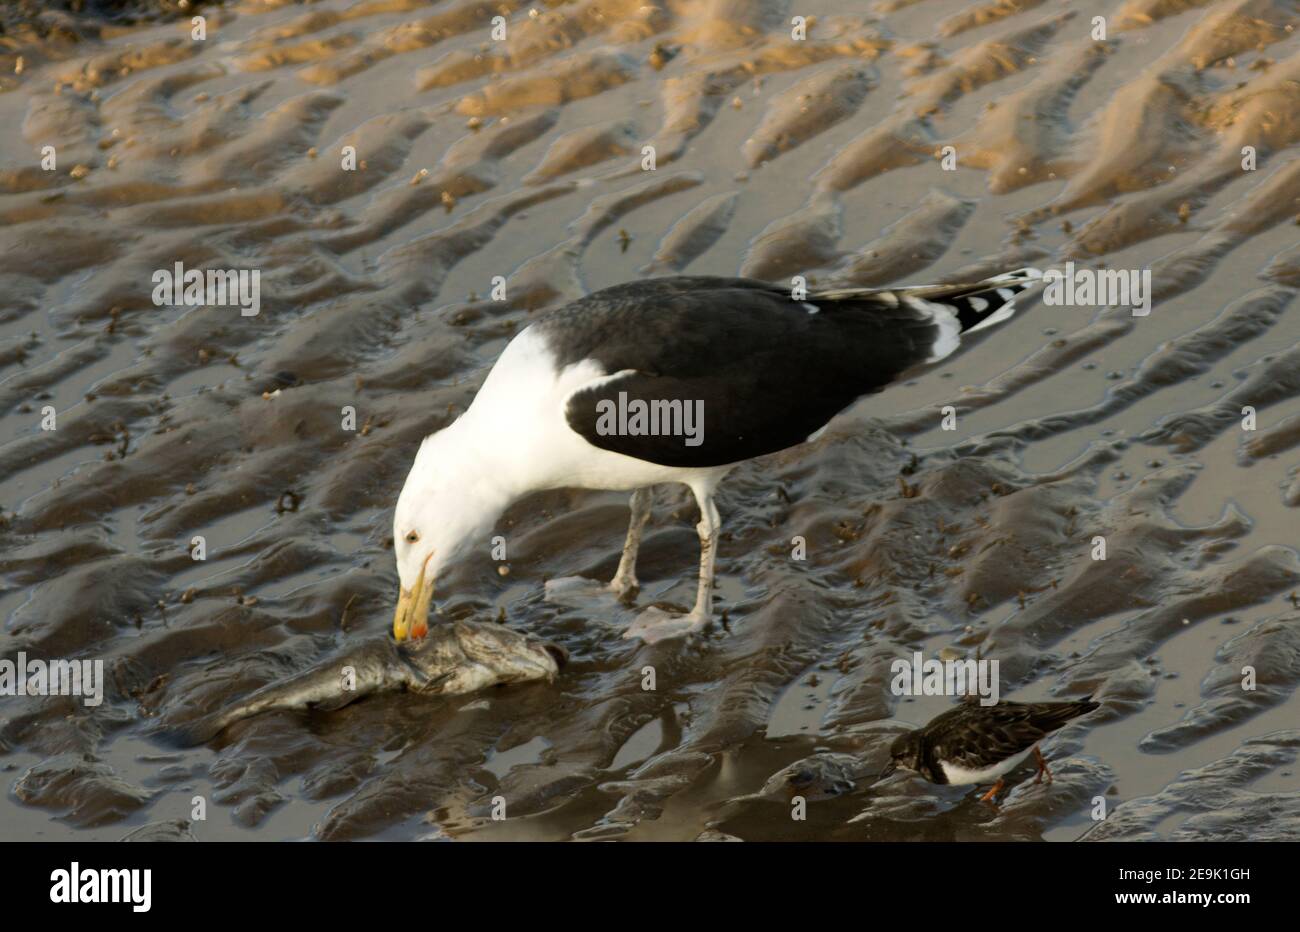 The Great Black-backed Gull is the largest of the UK seagulls. Here one if scavenging a dead Whiting whilst a Turnstone waits to pick up scraps. Stock Photo